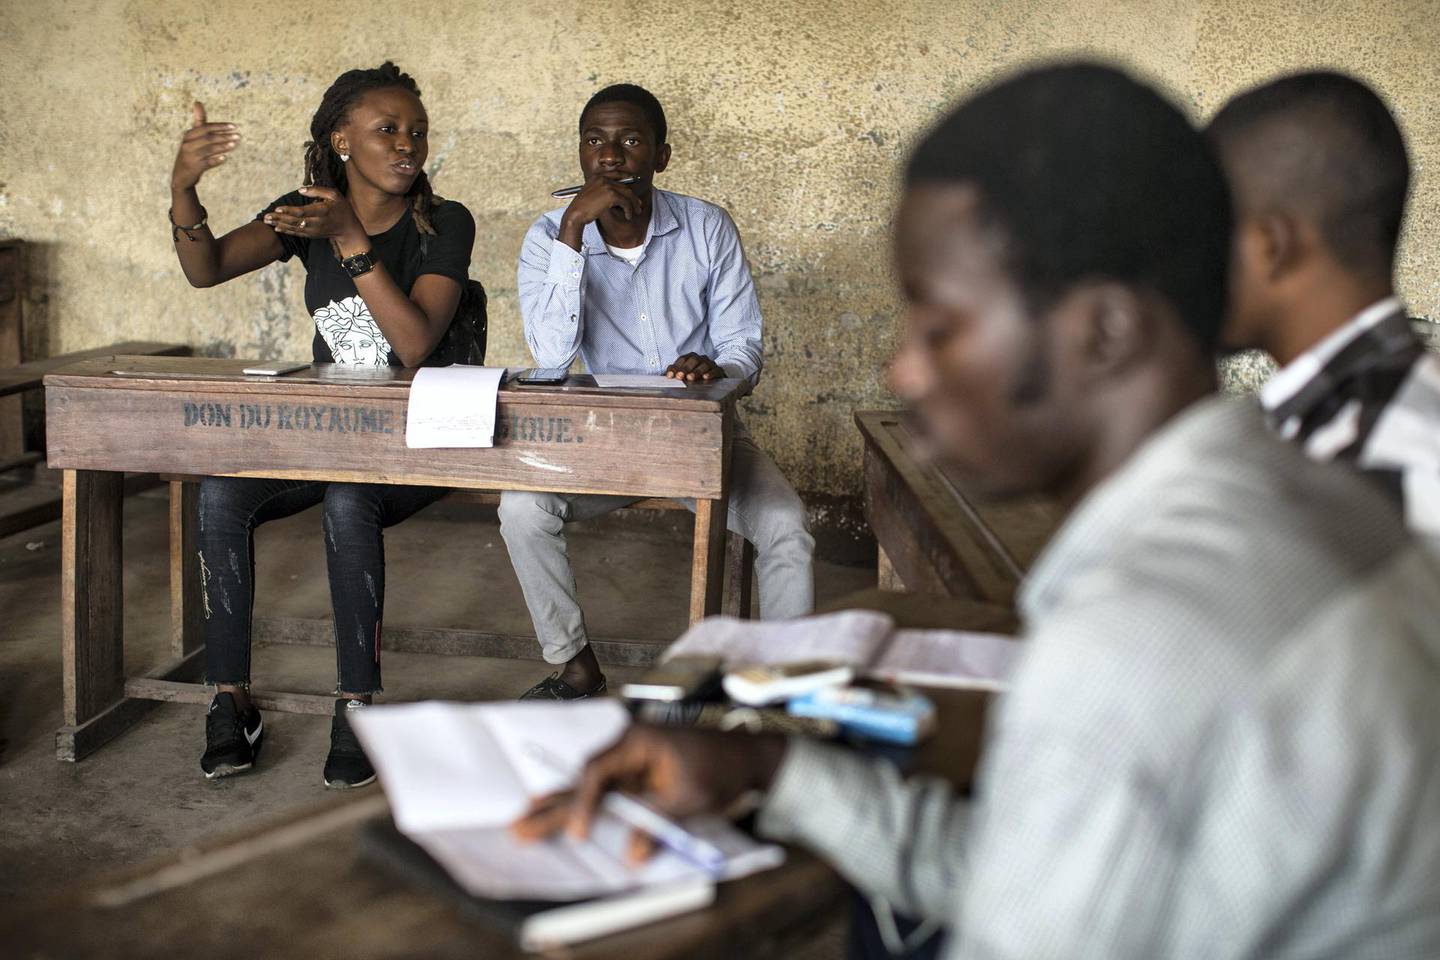 Eunice Etaka, far left, and Yves Diabikulwa, second from left, lead a "Luch-ology" class for new members in Kinshasa, DRC, Aug. 18, 2018. Etaka, a member of pro-democracy youth movement Lutte pour le Changement, or LUCHA, helps educate new members about the ideology, activities, and history of the group. 